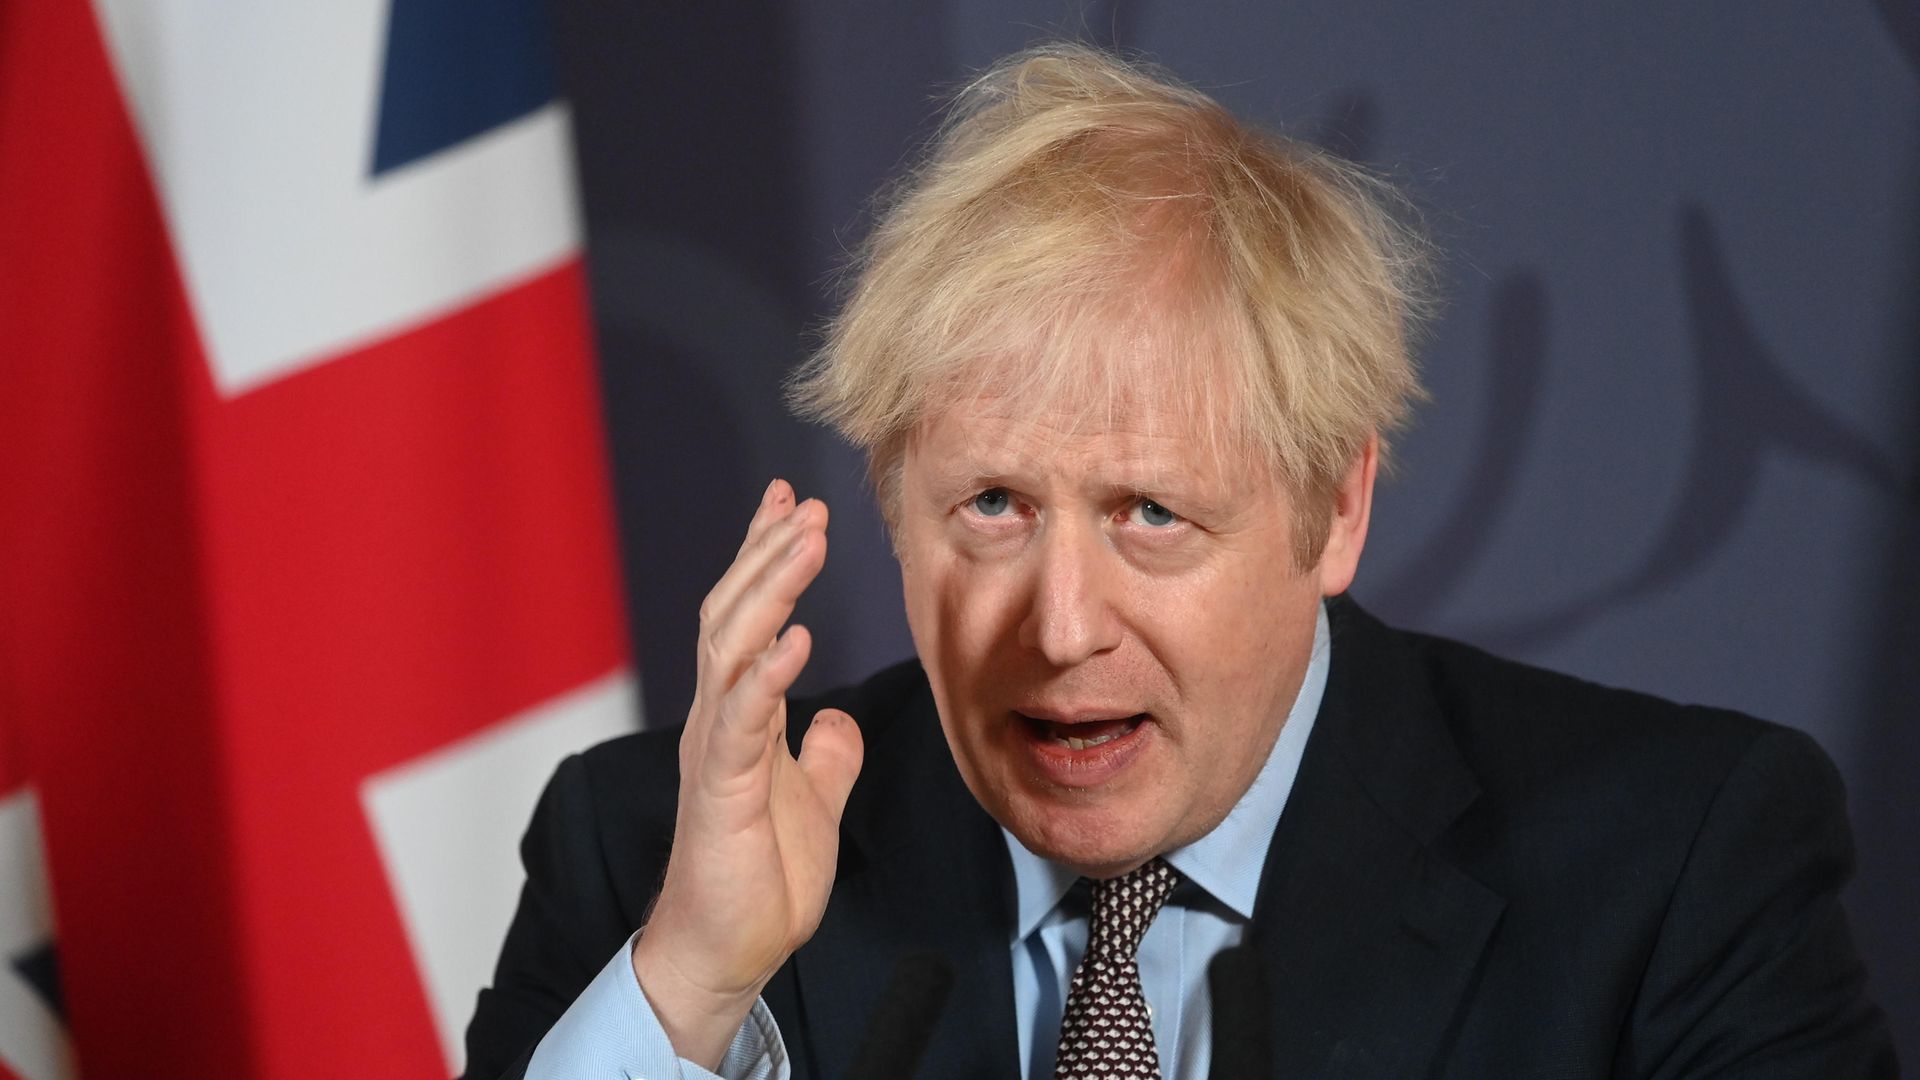 Prime Minister Boris Johnson during a media briefing in Downing Street, London, on the agreement of a post-Brexit trade deal. - Credit: PA